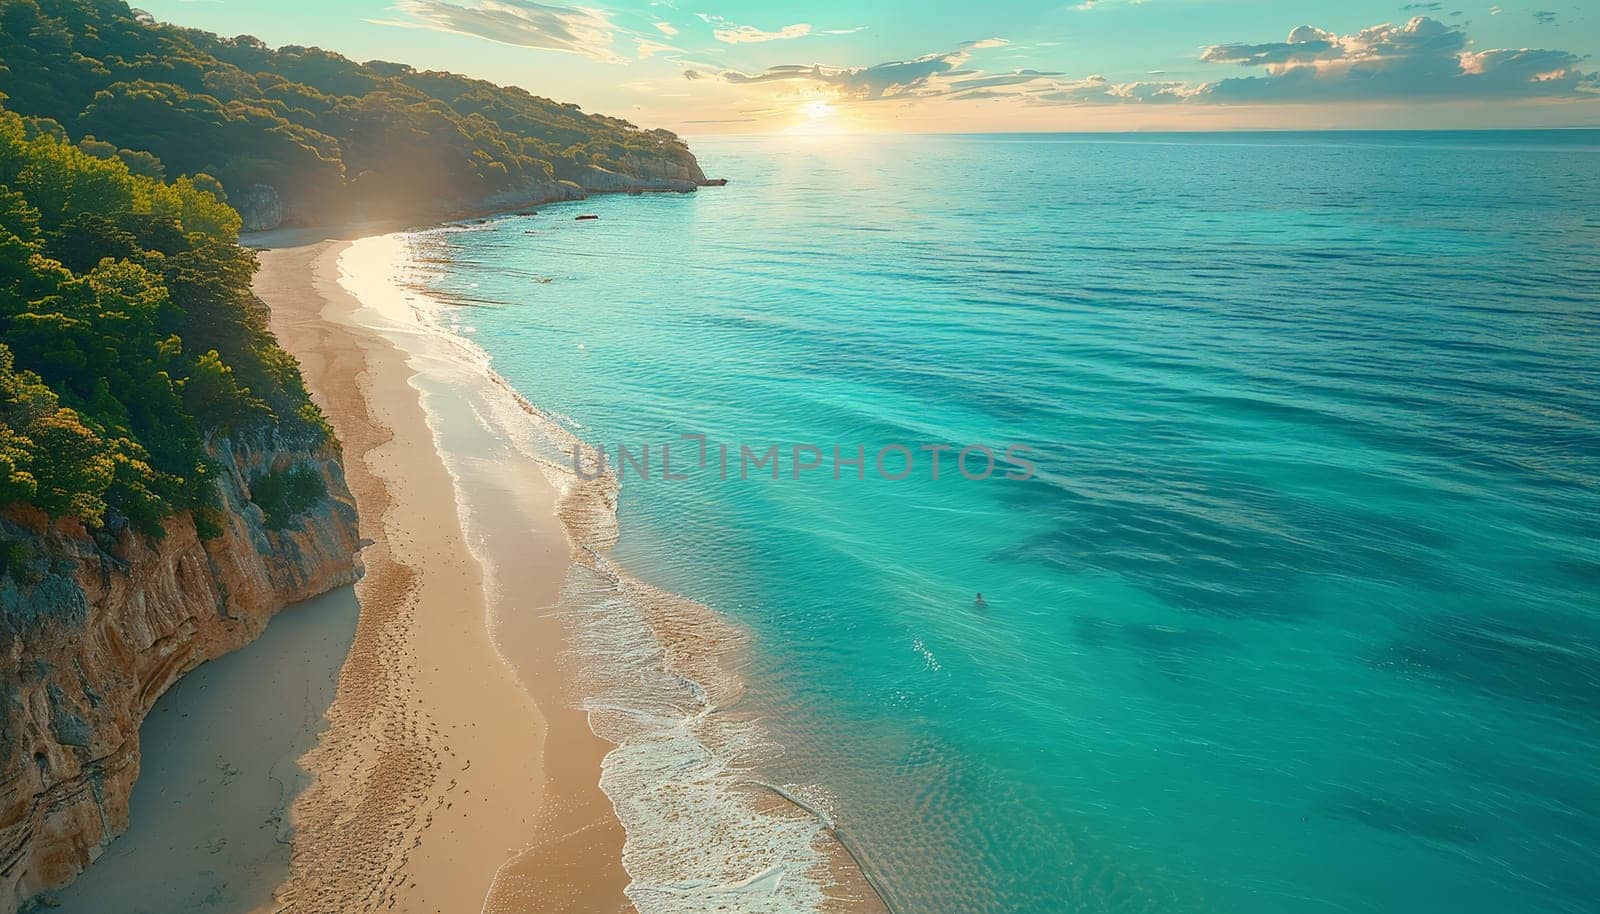 A beautiful beach with a blue ocean and a sunset in the background. The sky is clear and the water is calm